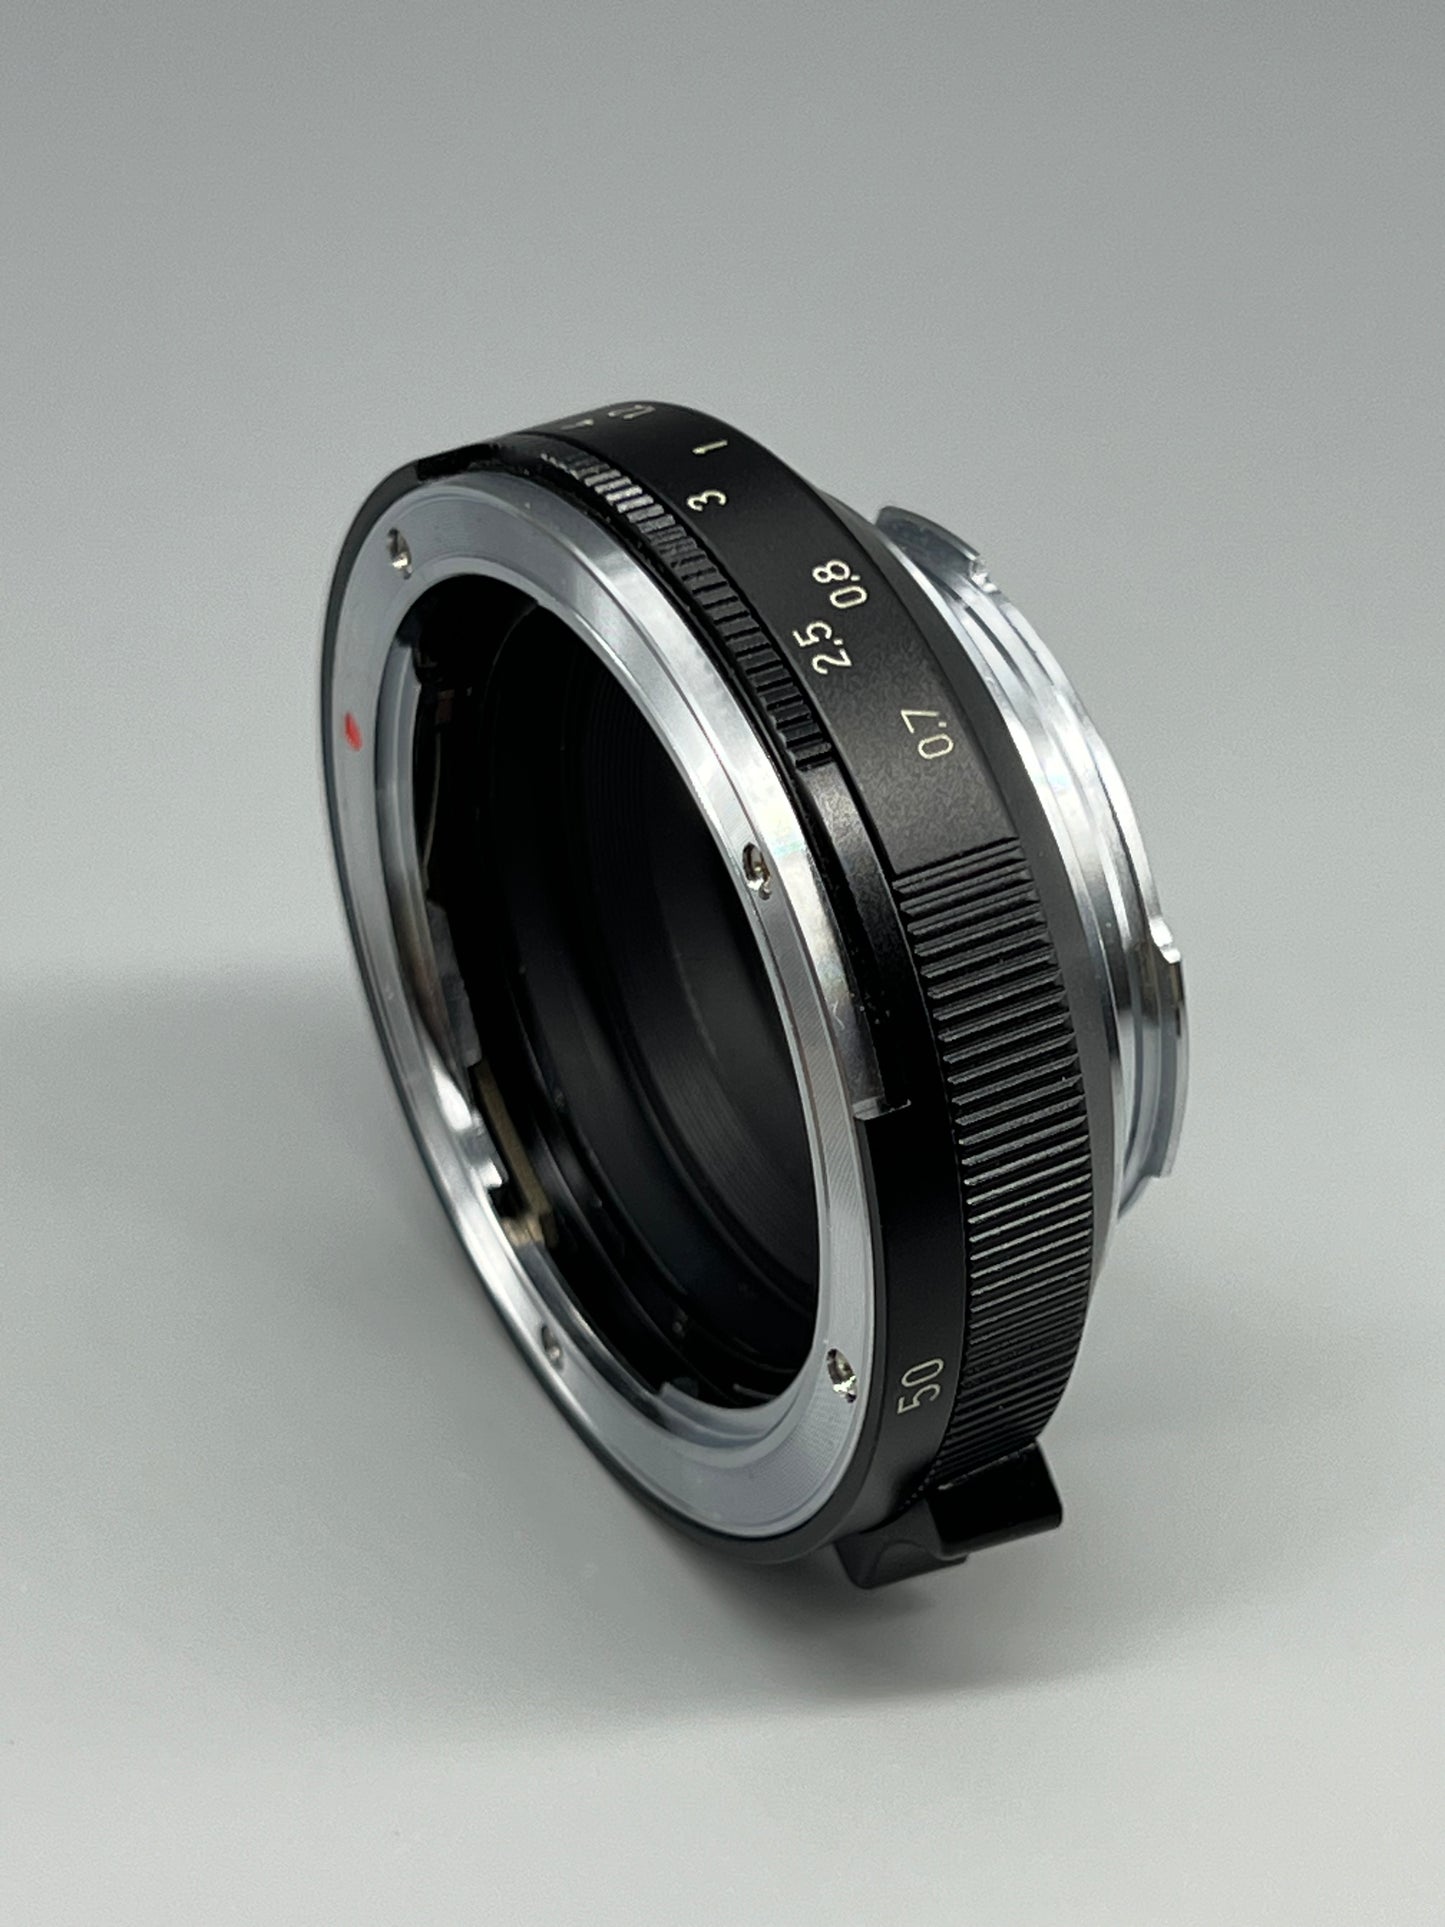 coupled CY-LM（Version 1.5） R50 rangefinder-link adapter CY mount lens to Leica M camera